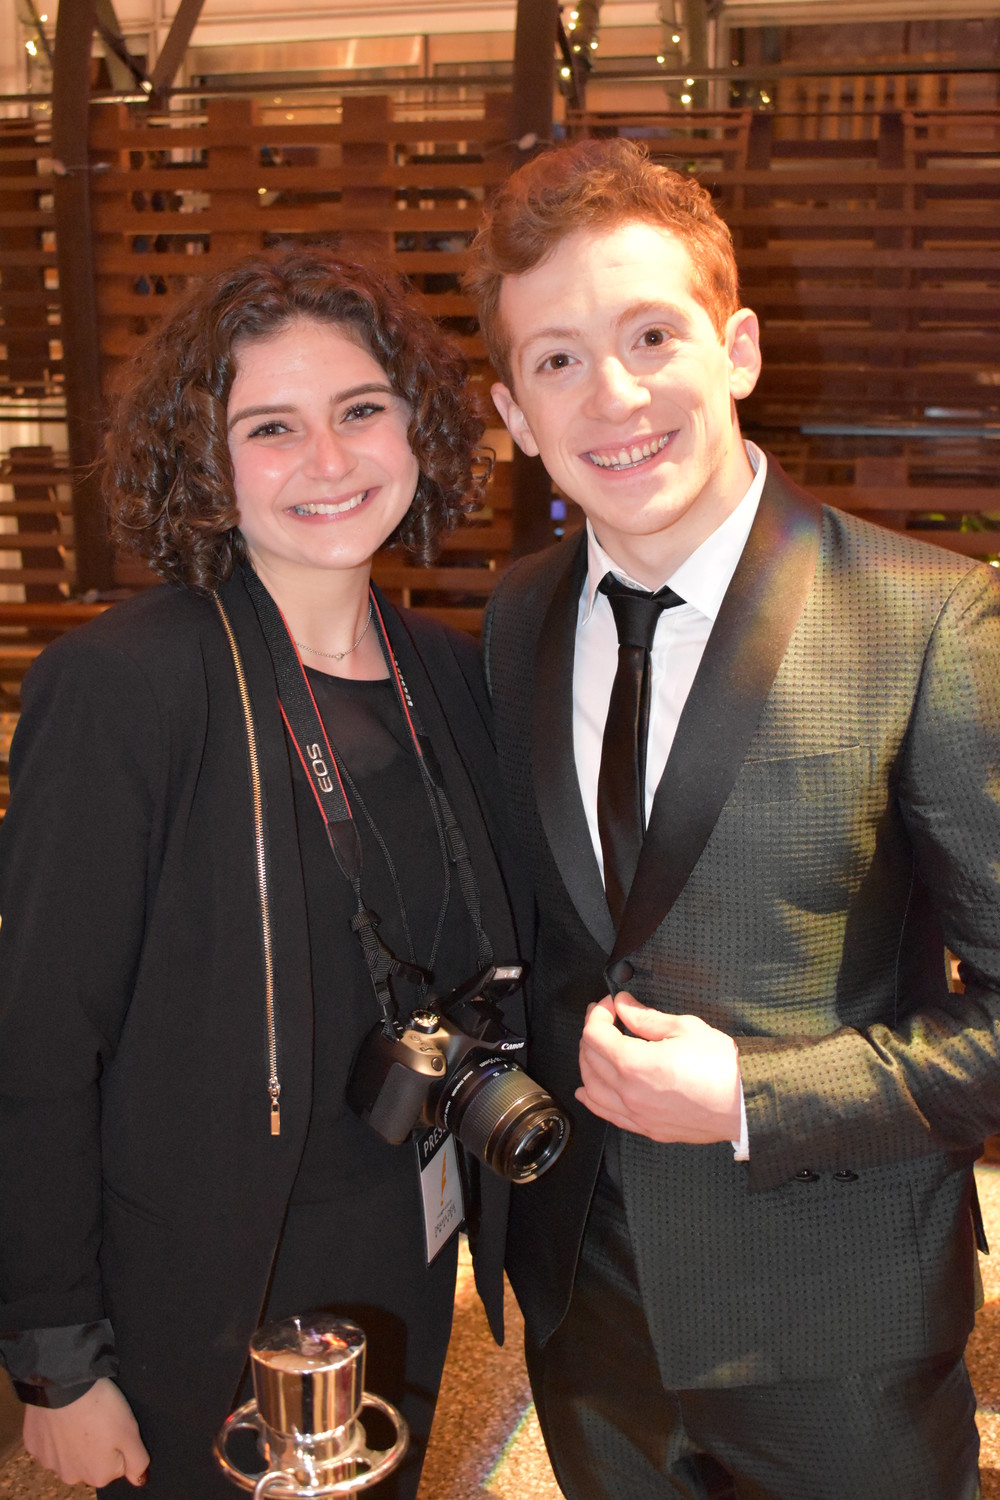 Zoe Malin had an opportunity to speak to Ethan Slater, who won a Drama Desk Award for his role in the Broadway musical “Spongebob Squarepants.”